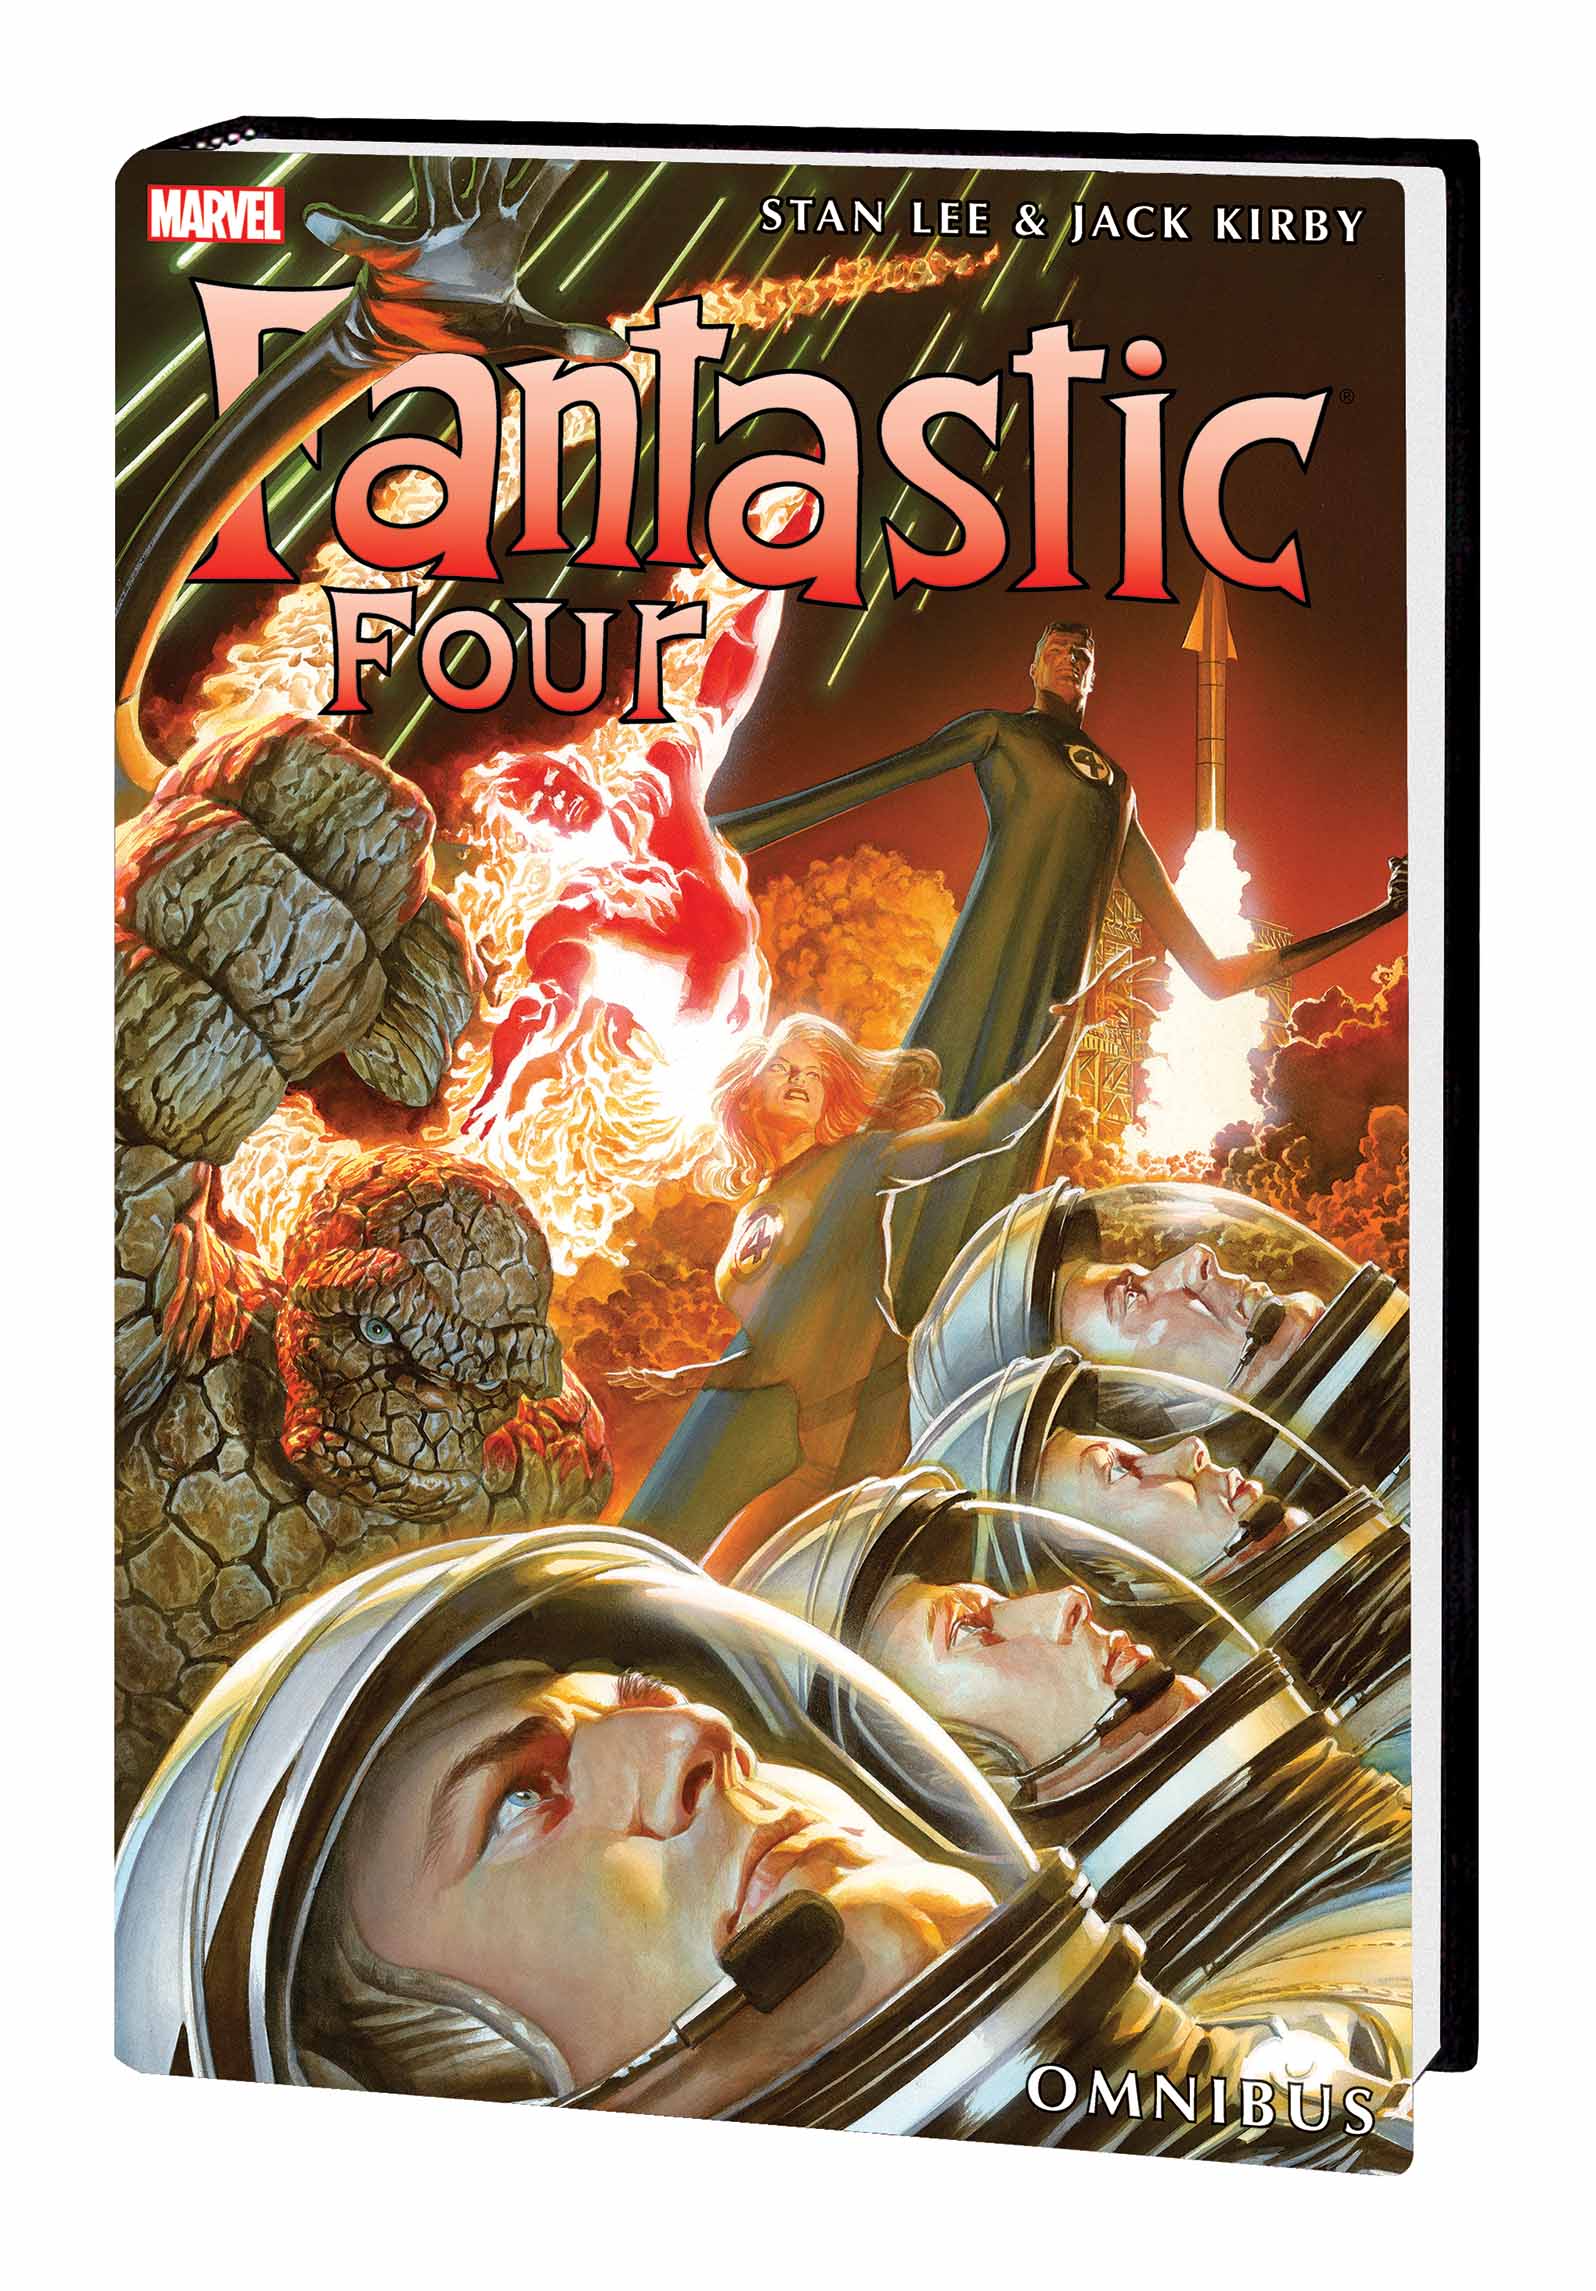 The Fantastic Four (Hardcover)